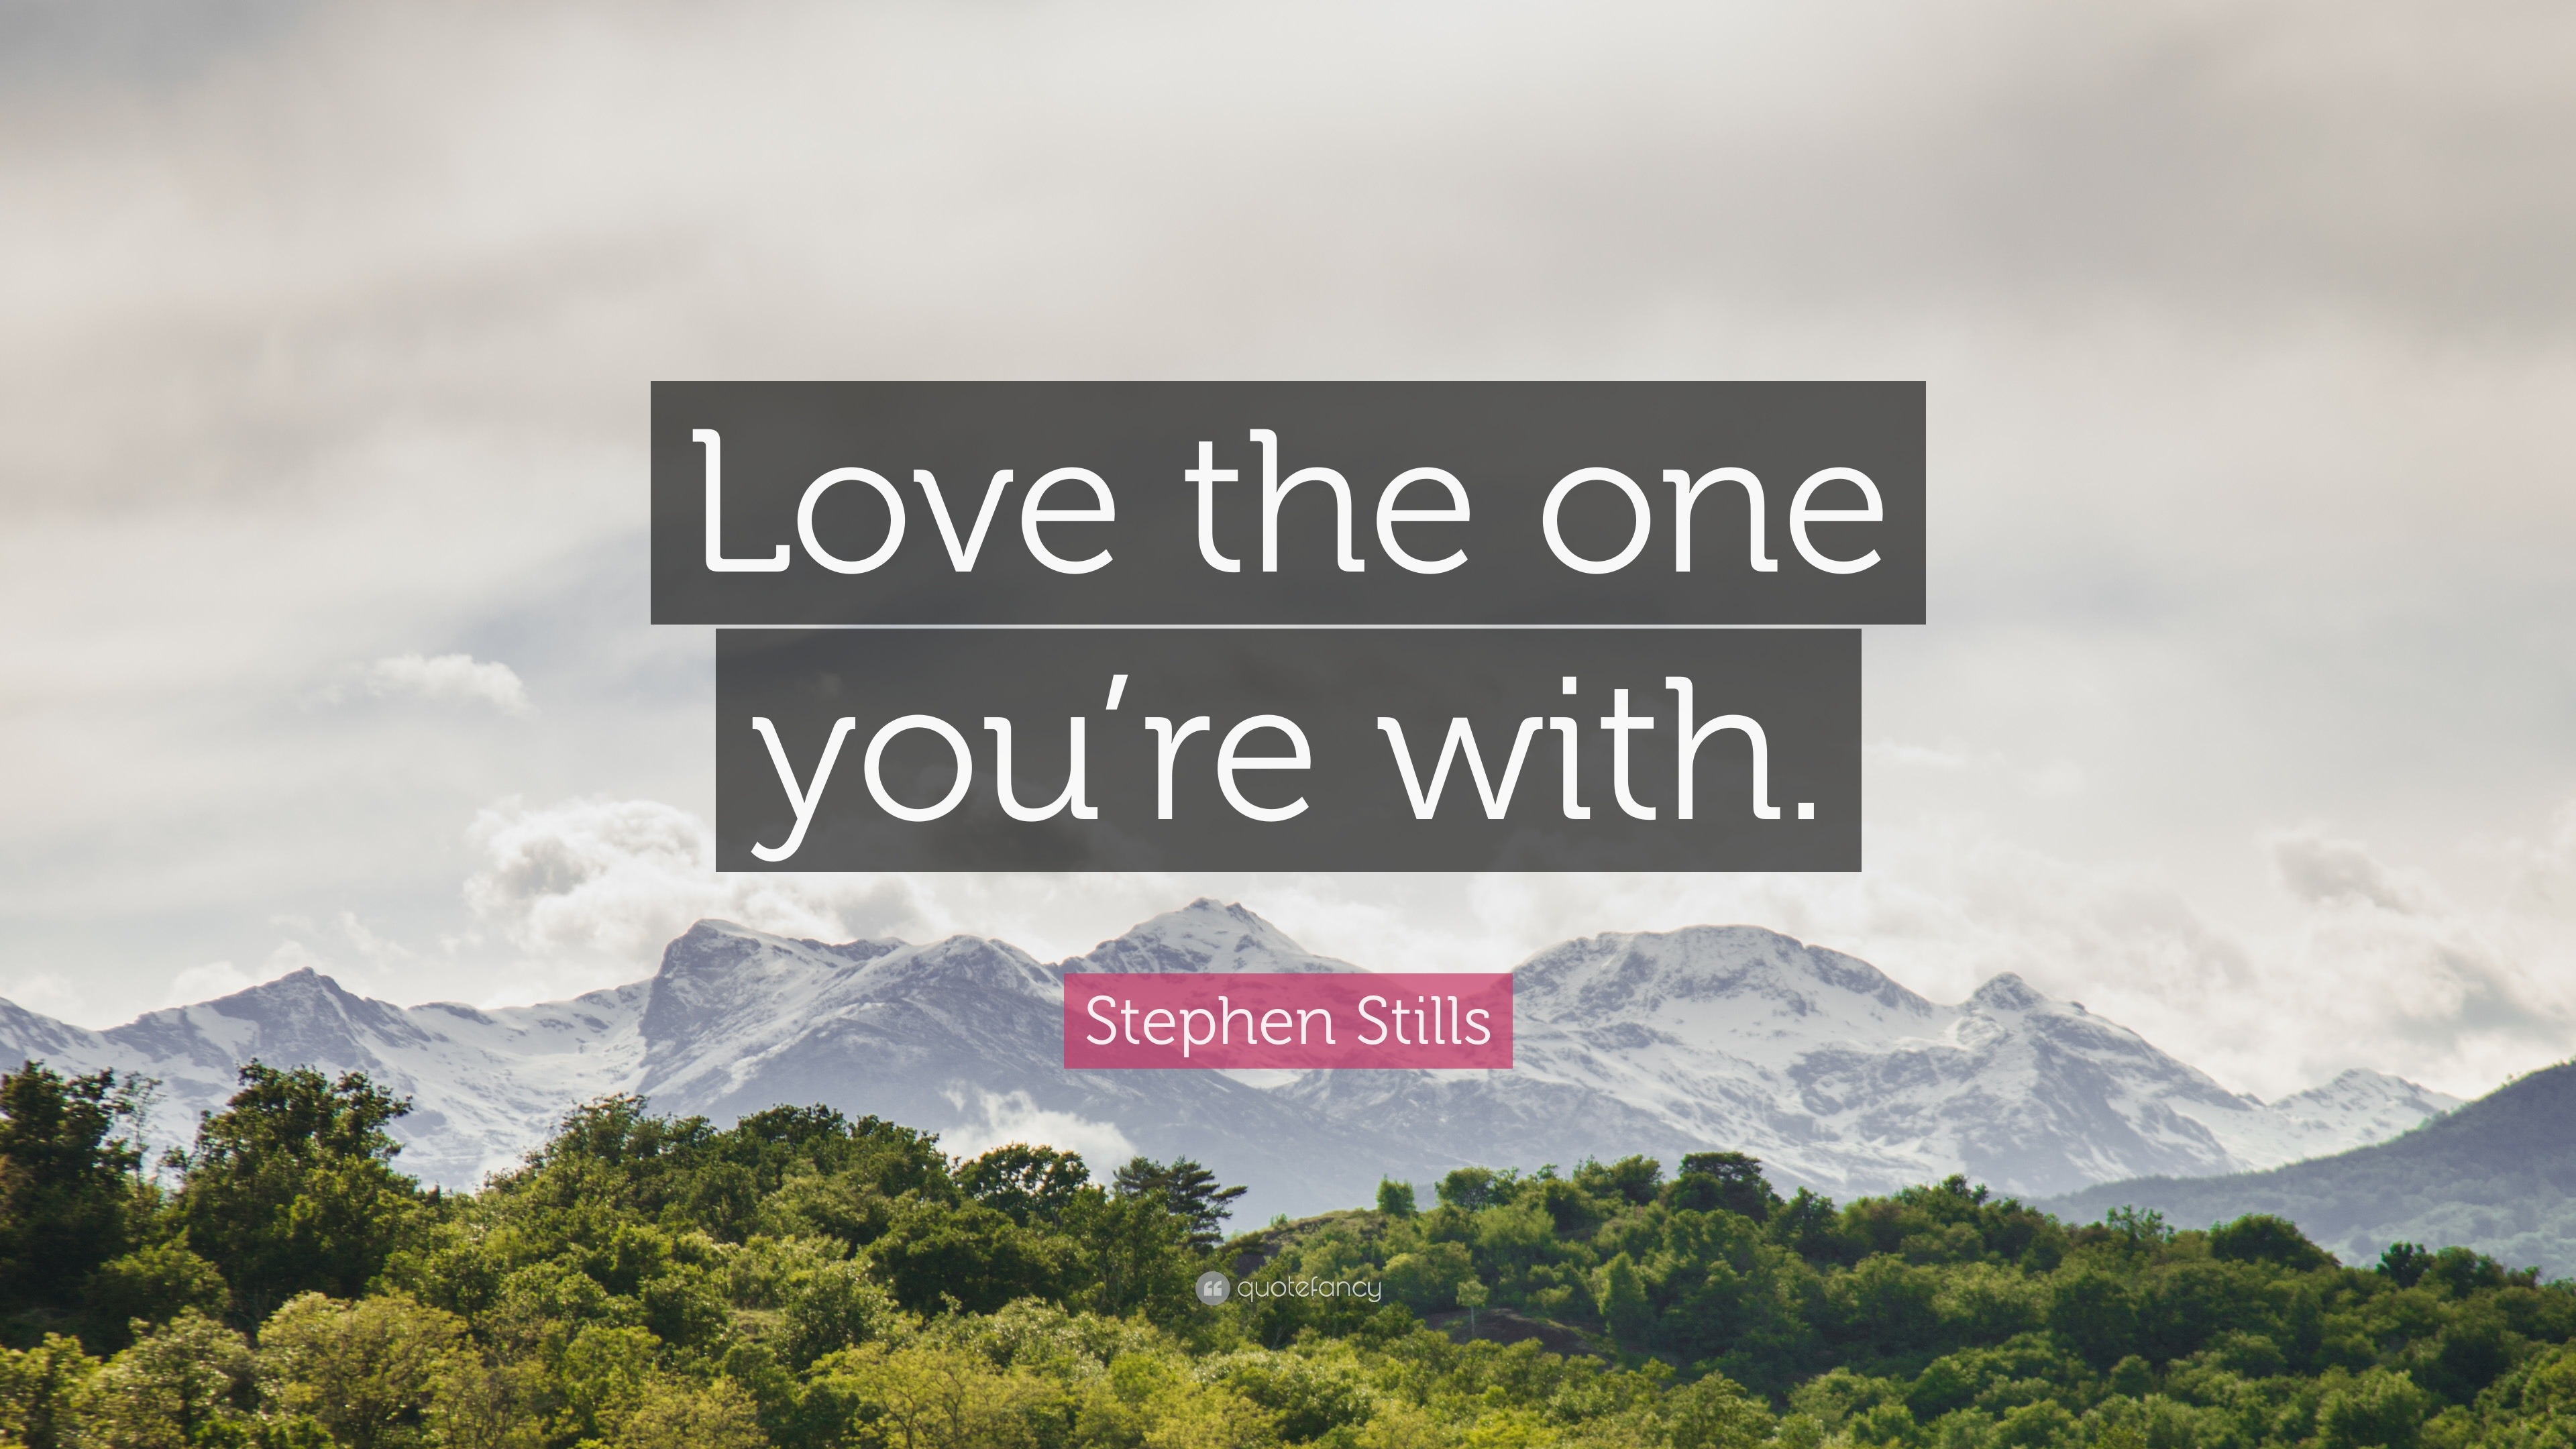 Stephen Stills Quote “Love the one you re with ”